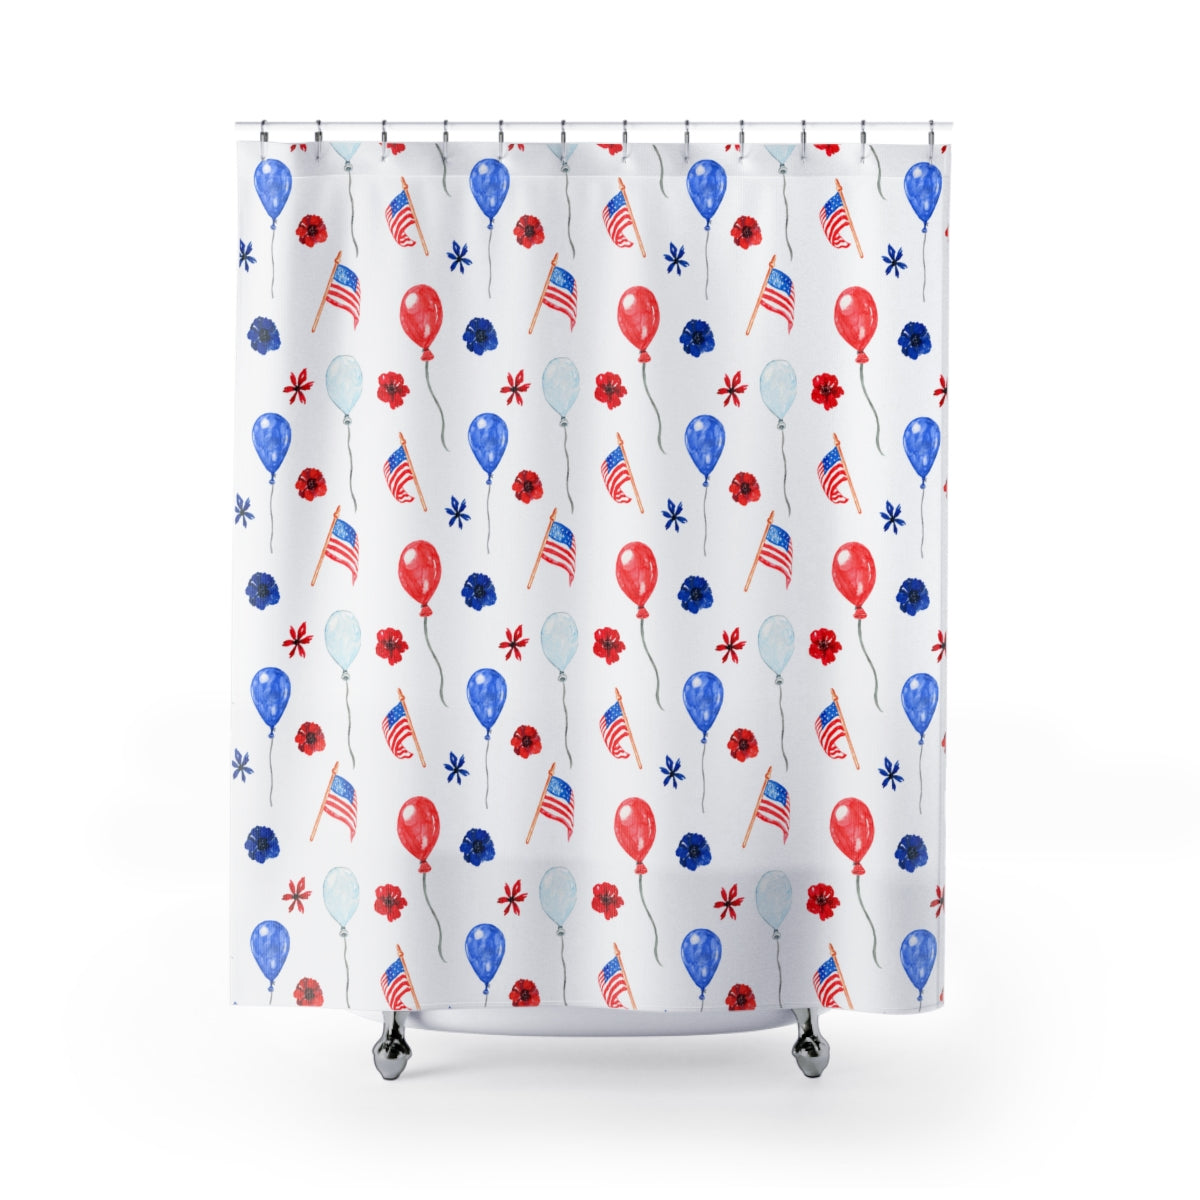 American Flags and Balloons Shower Curtain